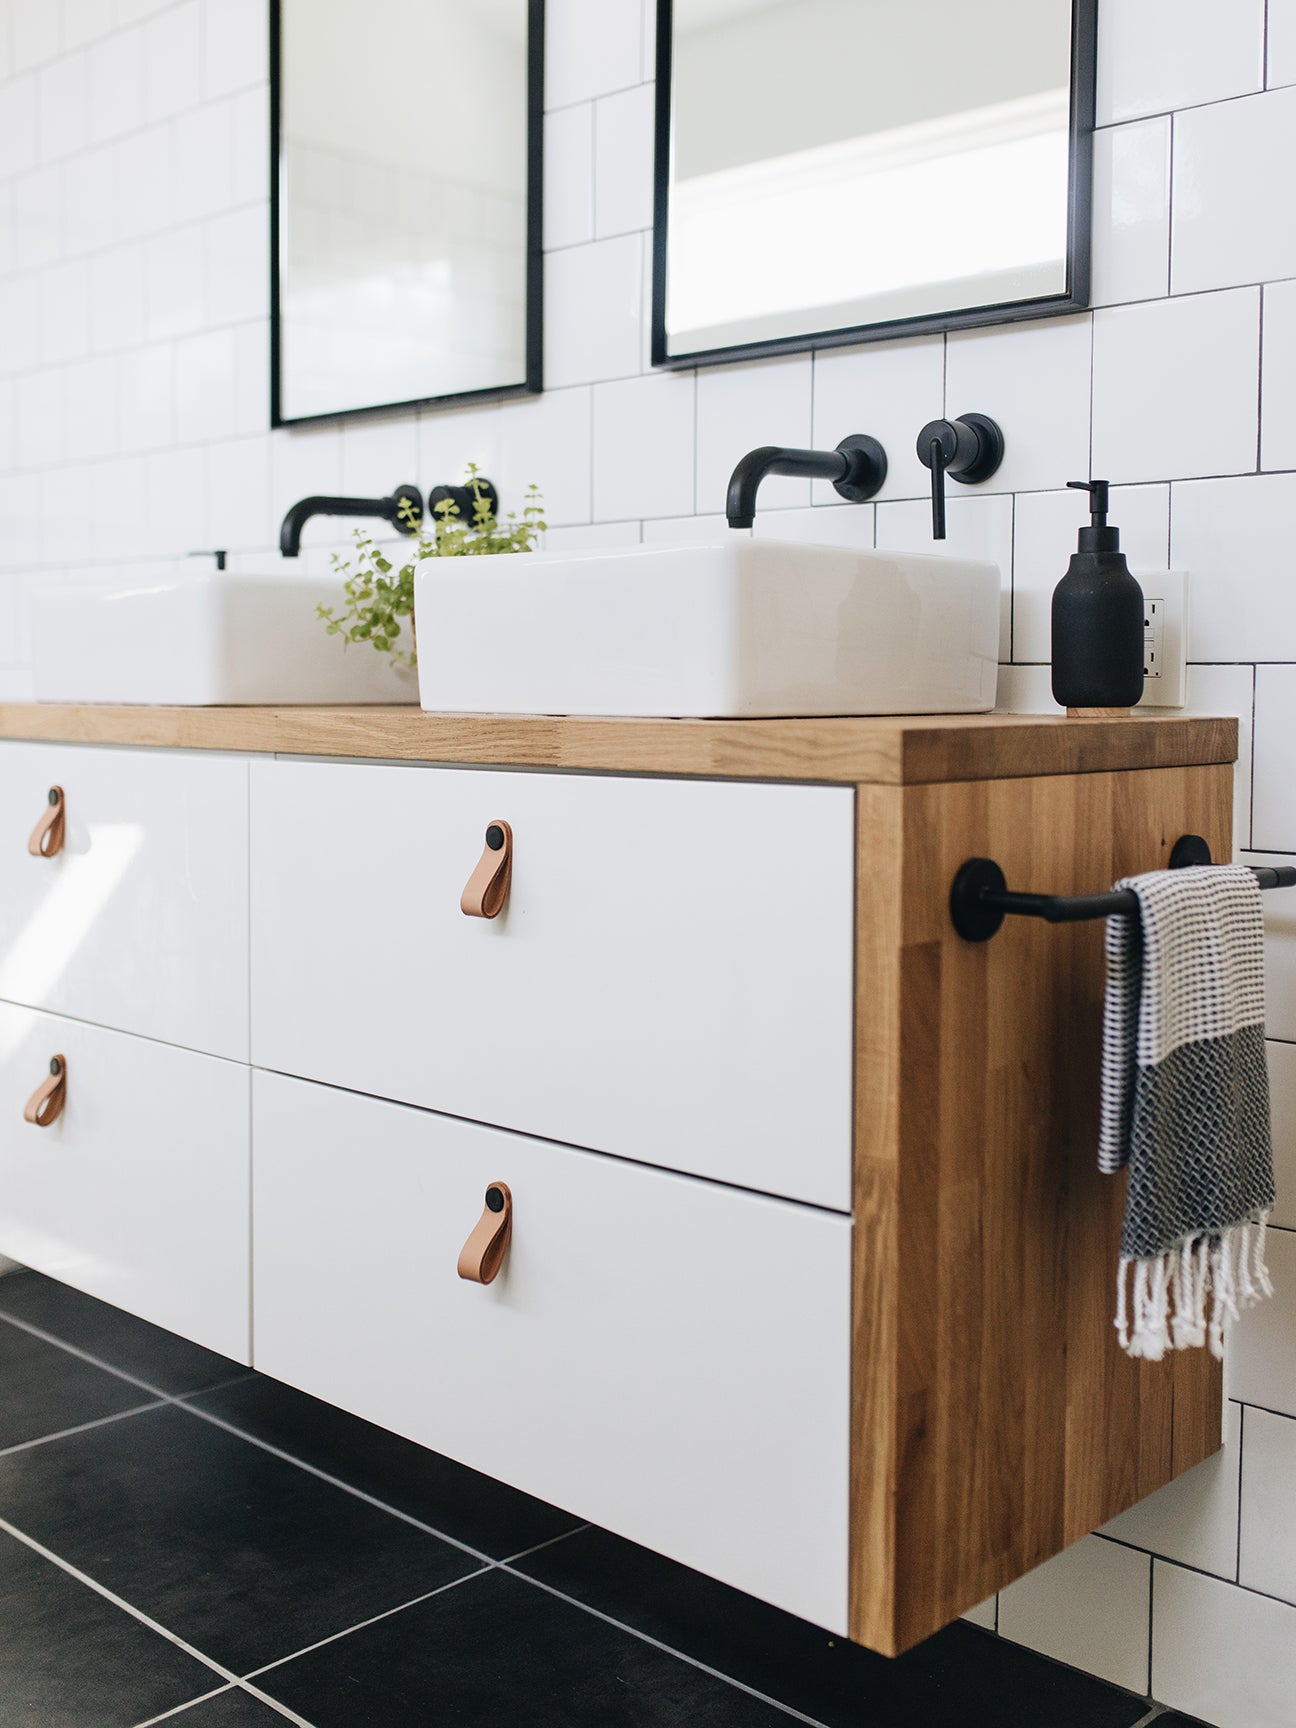 13 Ikea S That Were Made For Small, Bathroom Vanity Units With Basin Ikea